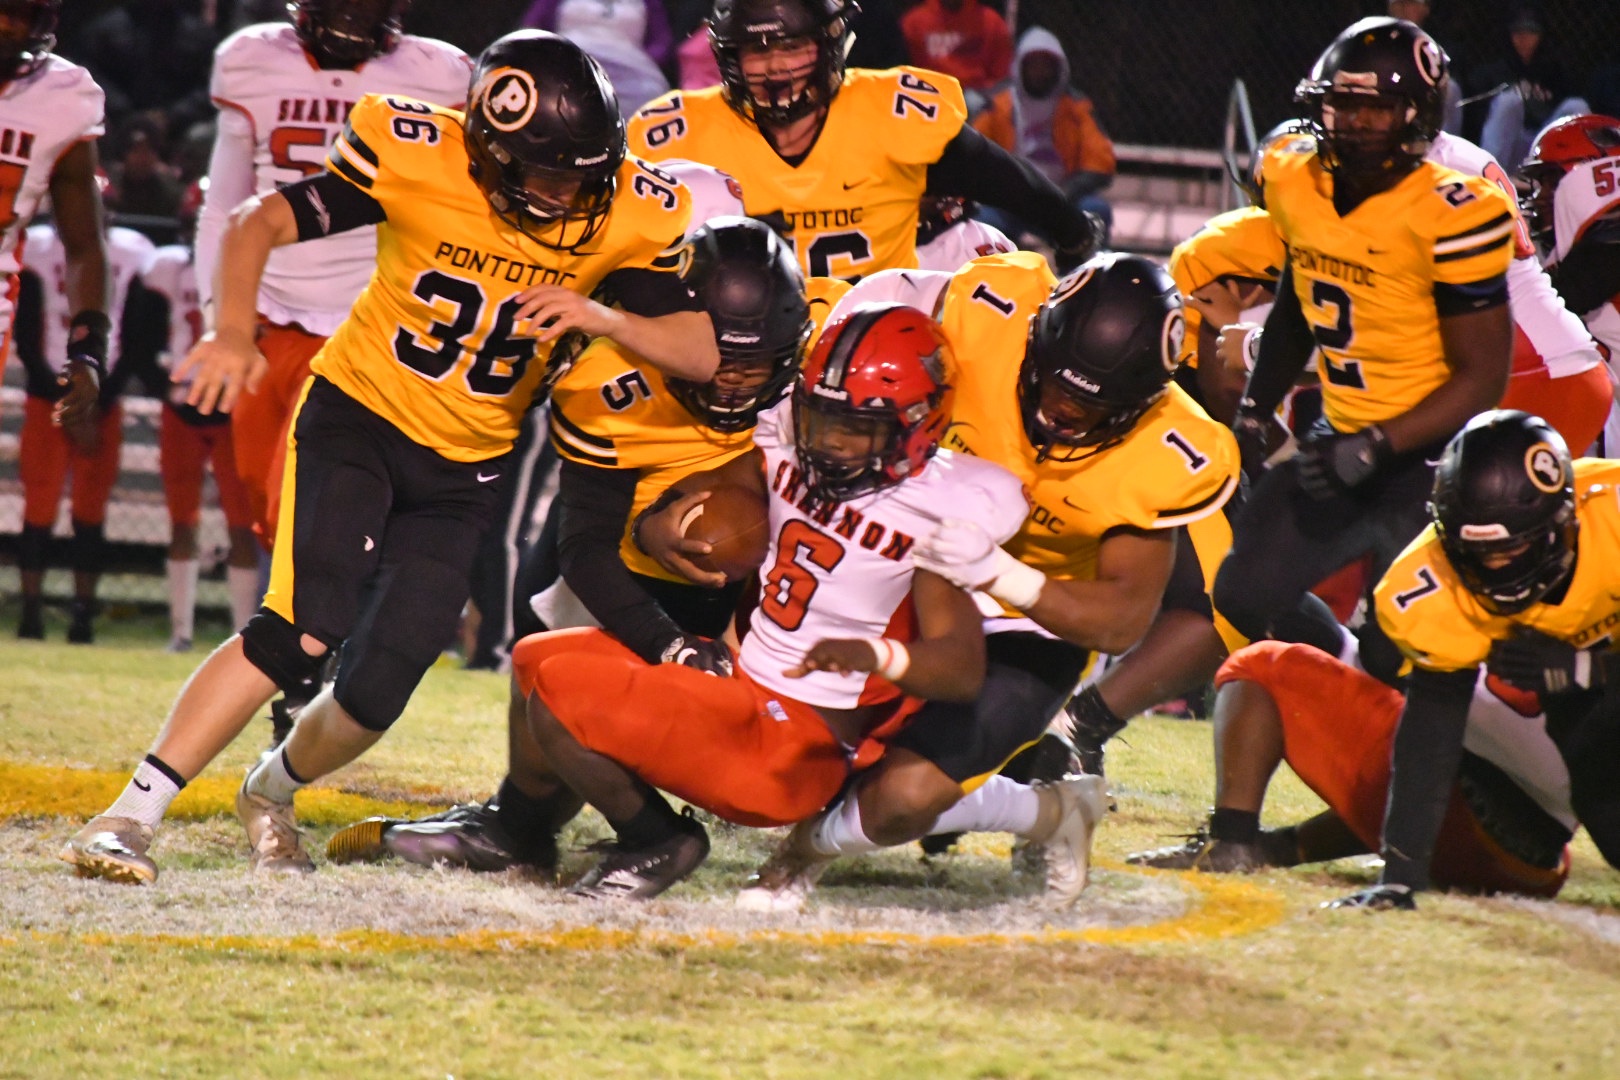 Pontotoc clinches 2 seed, home playoff game with win over Shannon